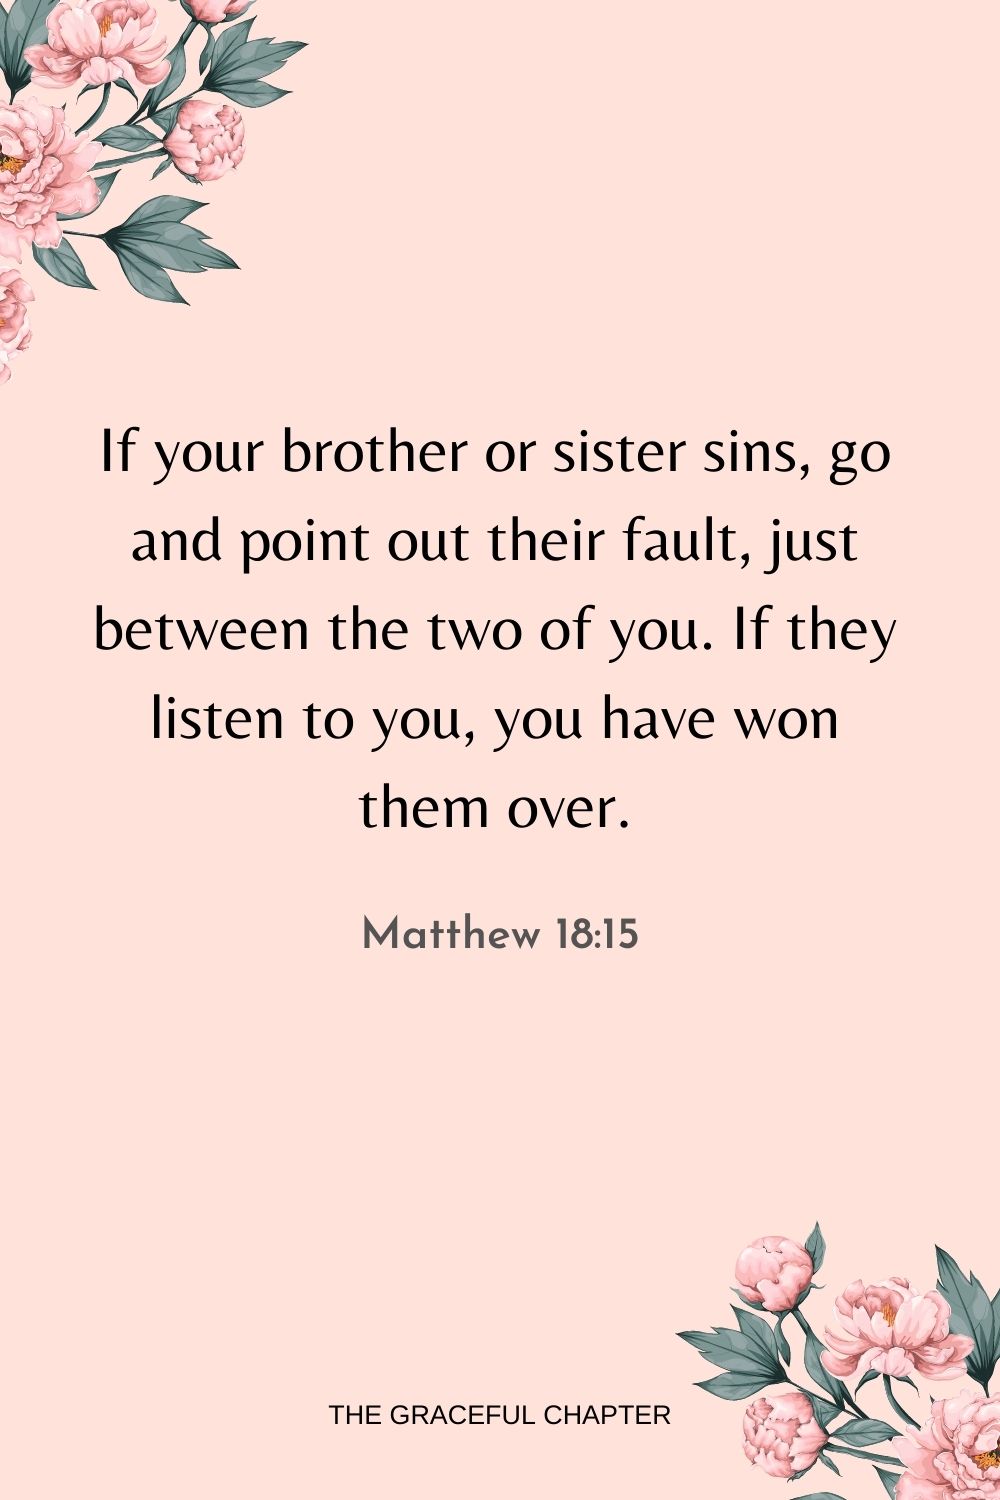 If your brother or sister sins, go and point out their fault, just between the two of you. If they listen to you, you have won them over. Matthew 18:15